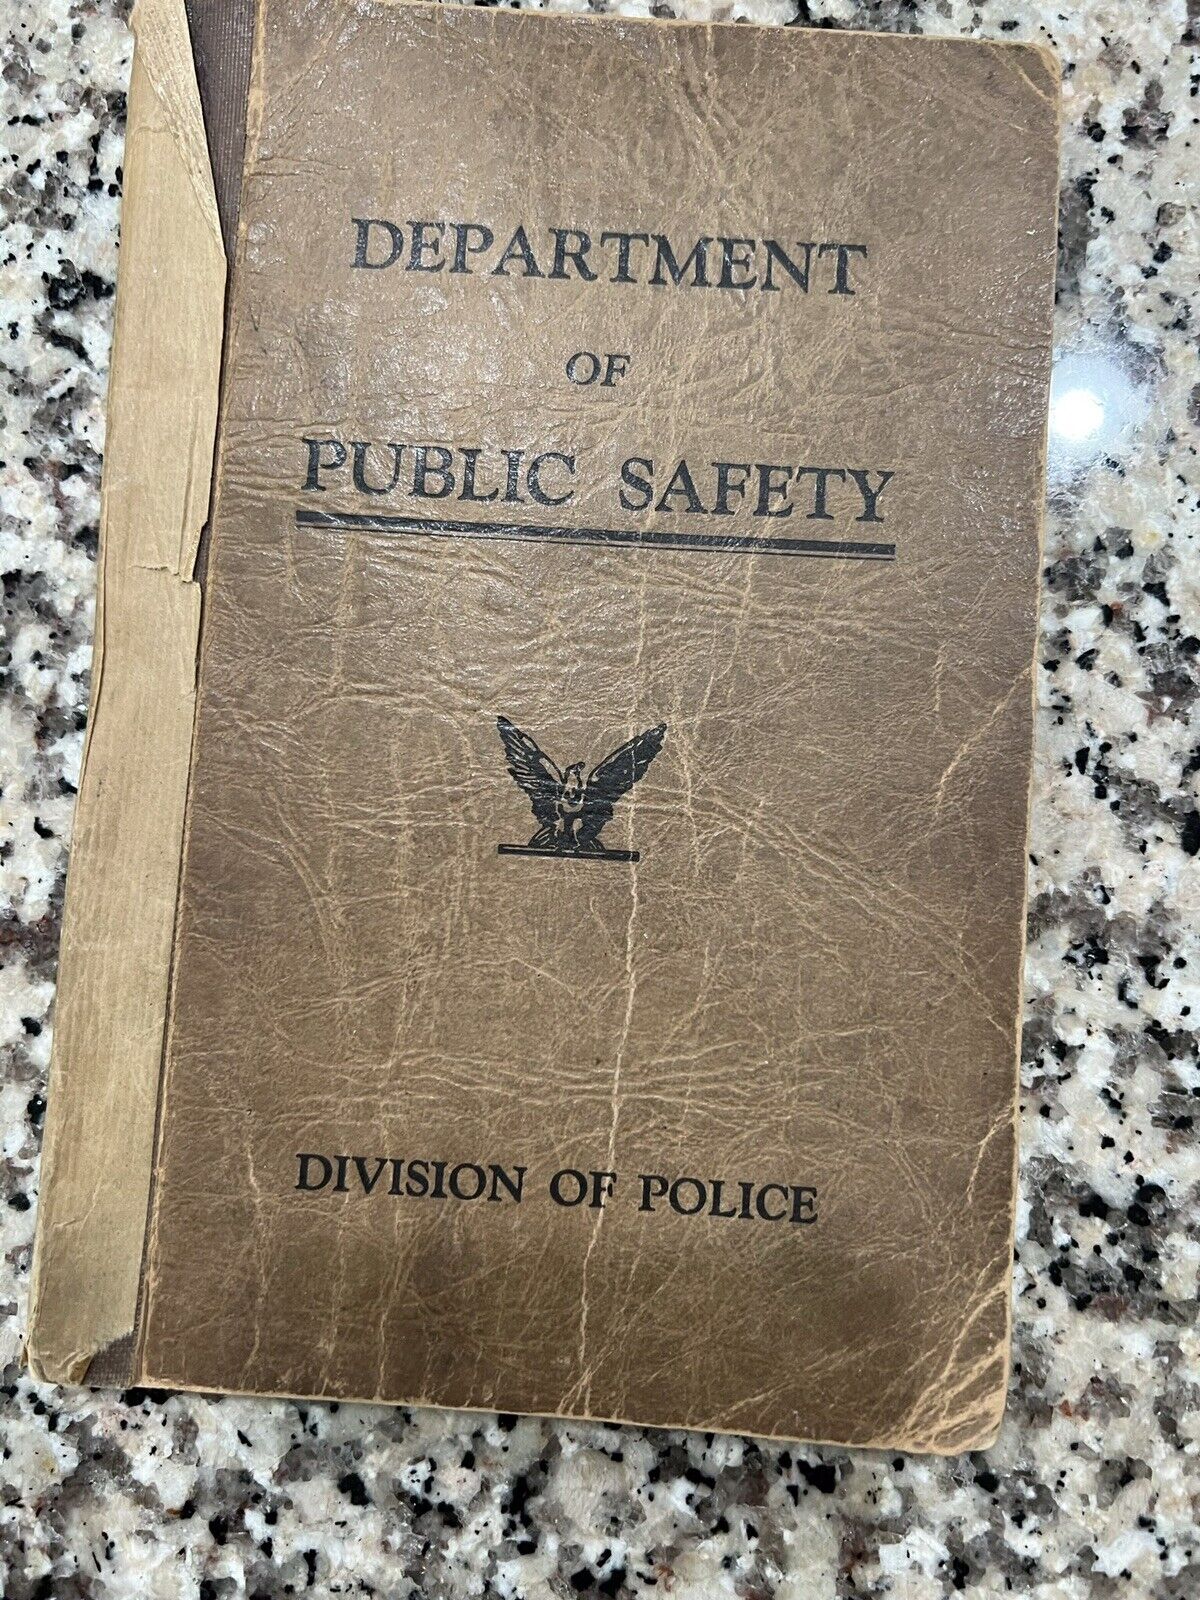 Youngstown Police 1930 Rules & Regulations